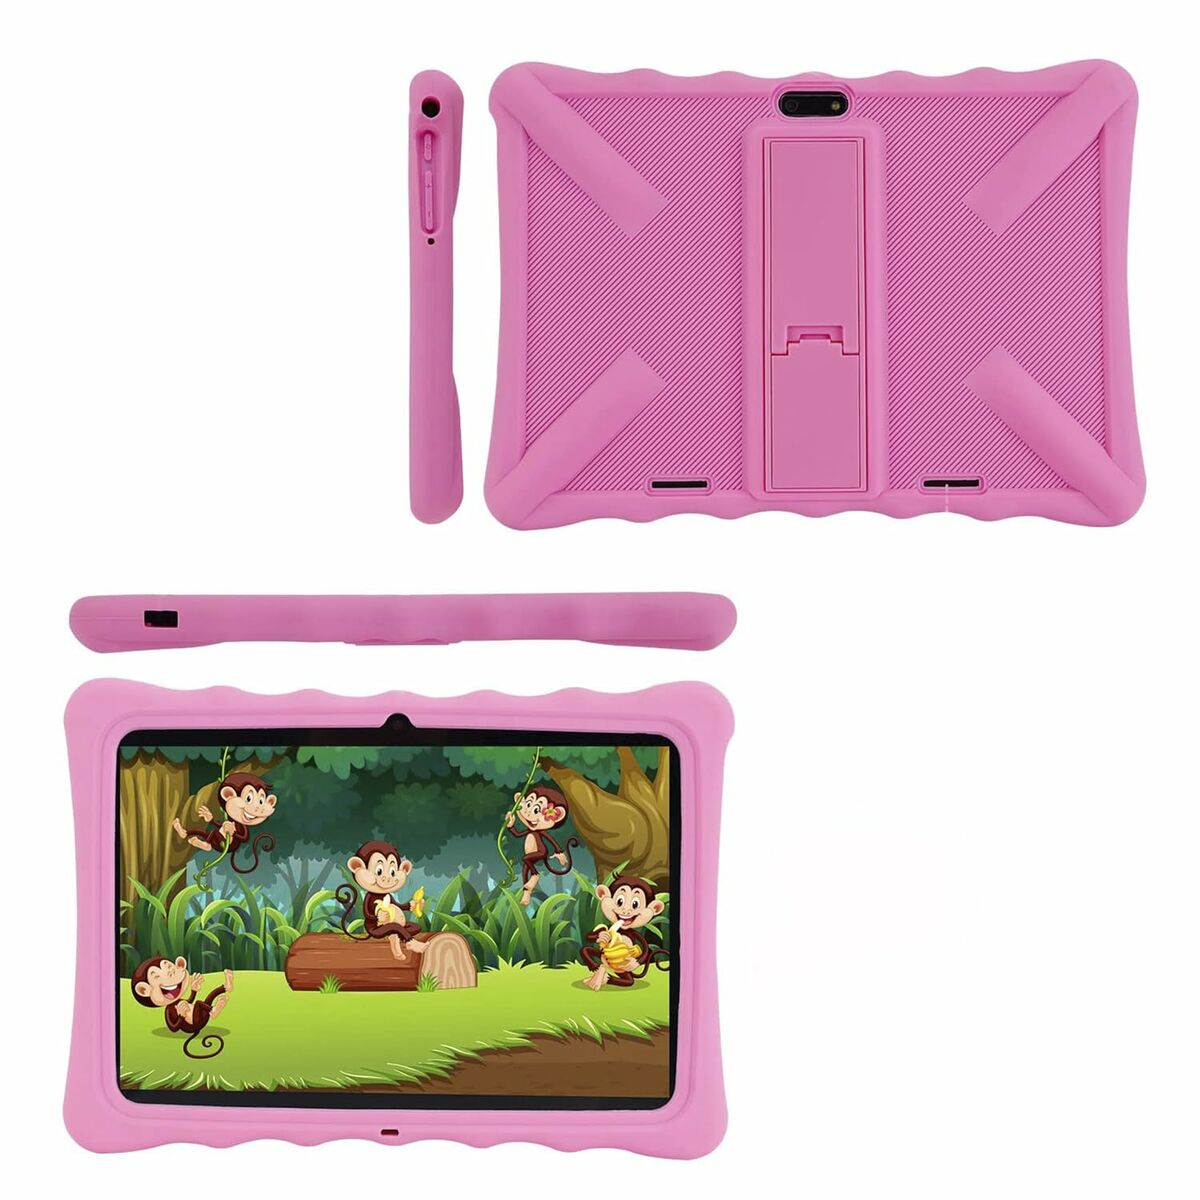 Interactive Tablet for Children A7 Pink, BigBuy Tech, Toys and games, Electronic toys, interactive-tablet-for-children-a7-pink, Brand_BigBuy Tech, category-reference-2609, category-reference-2617, category-reference-2626, category-reference-t-11190, category-reference-t-11203, category-reference-t-11206, category-reference-t-19663, Condition_NEW, entertainment, para los más peques, Price_100 - 200, telephones & tablets, vuelta al cole, RiotNook